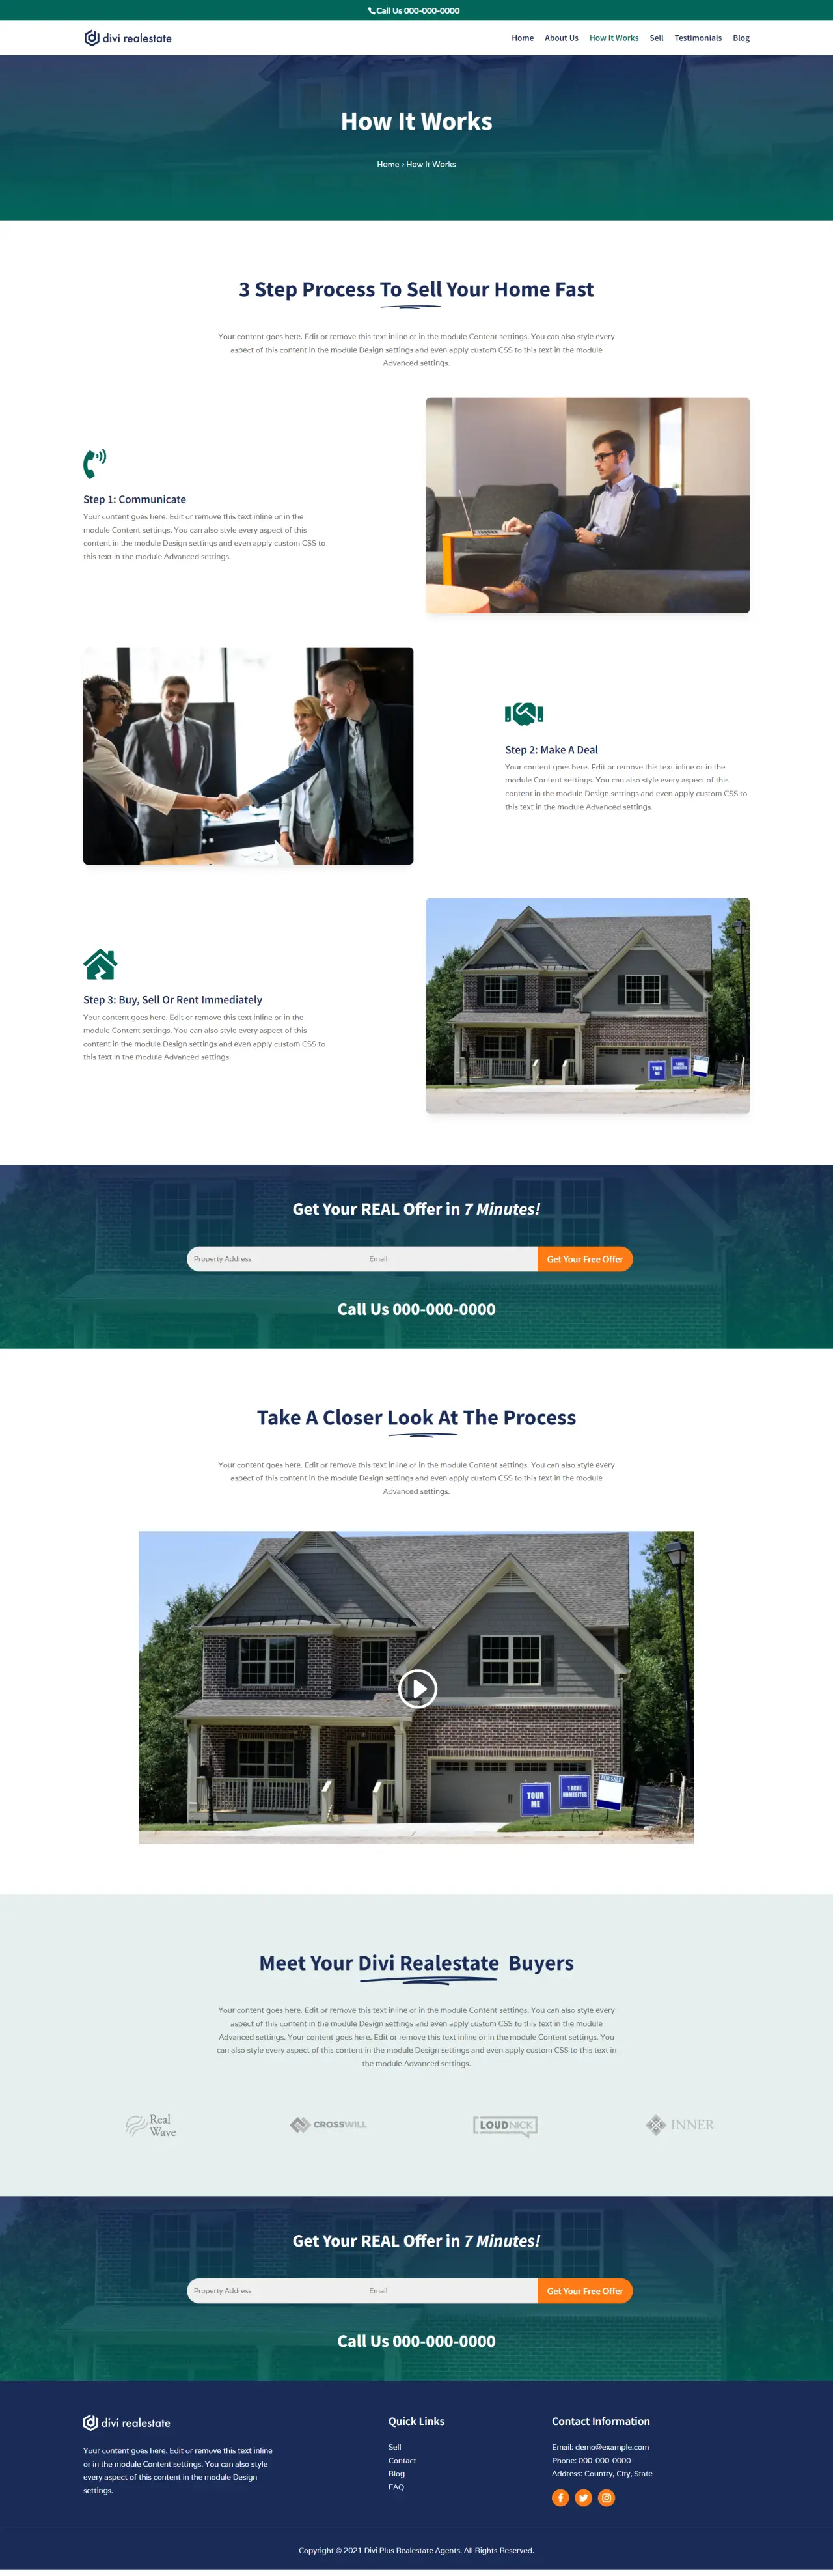 Divi Plus Home Buyers How It Works